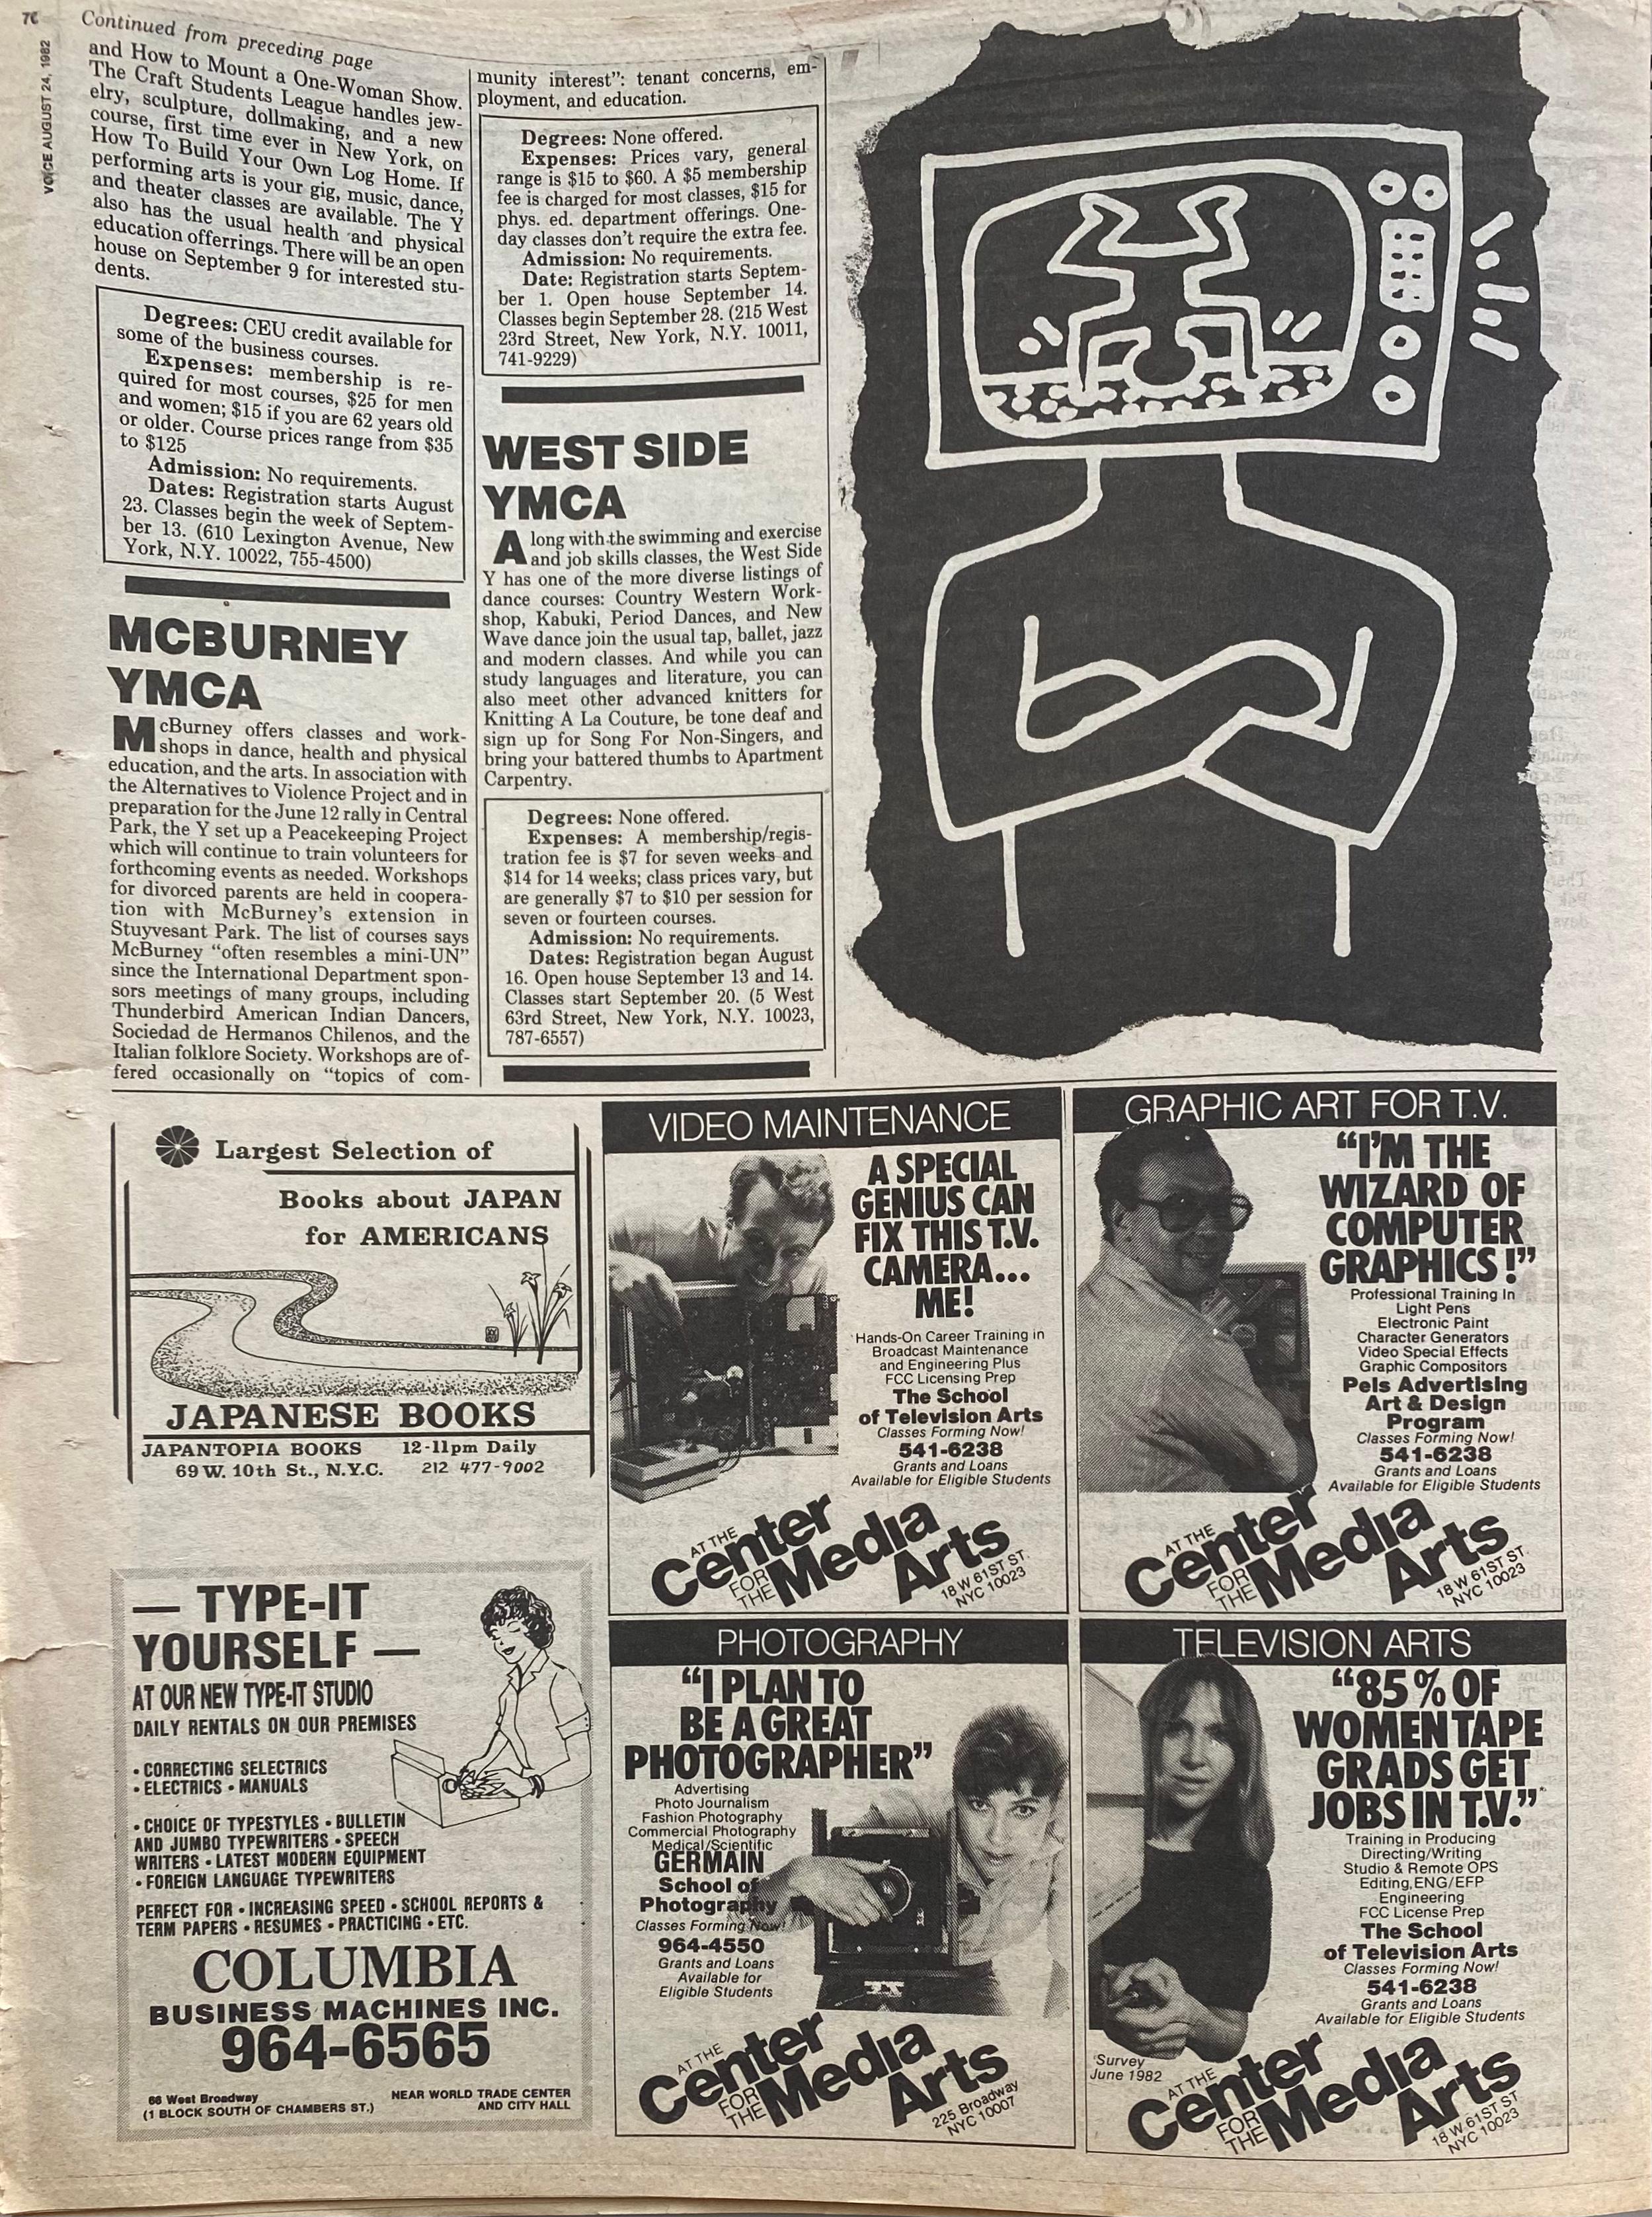 Paper Keith Haring The Village Voice, 1982